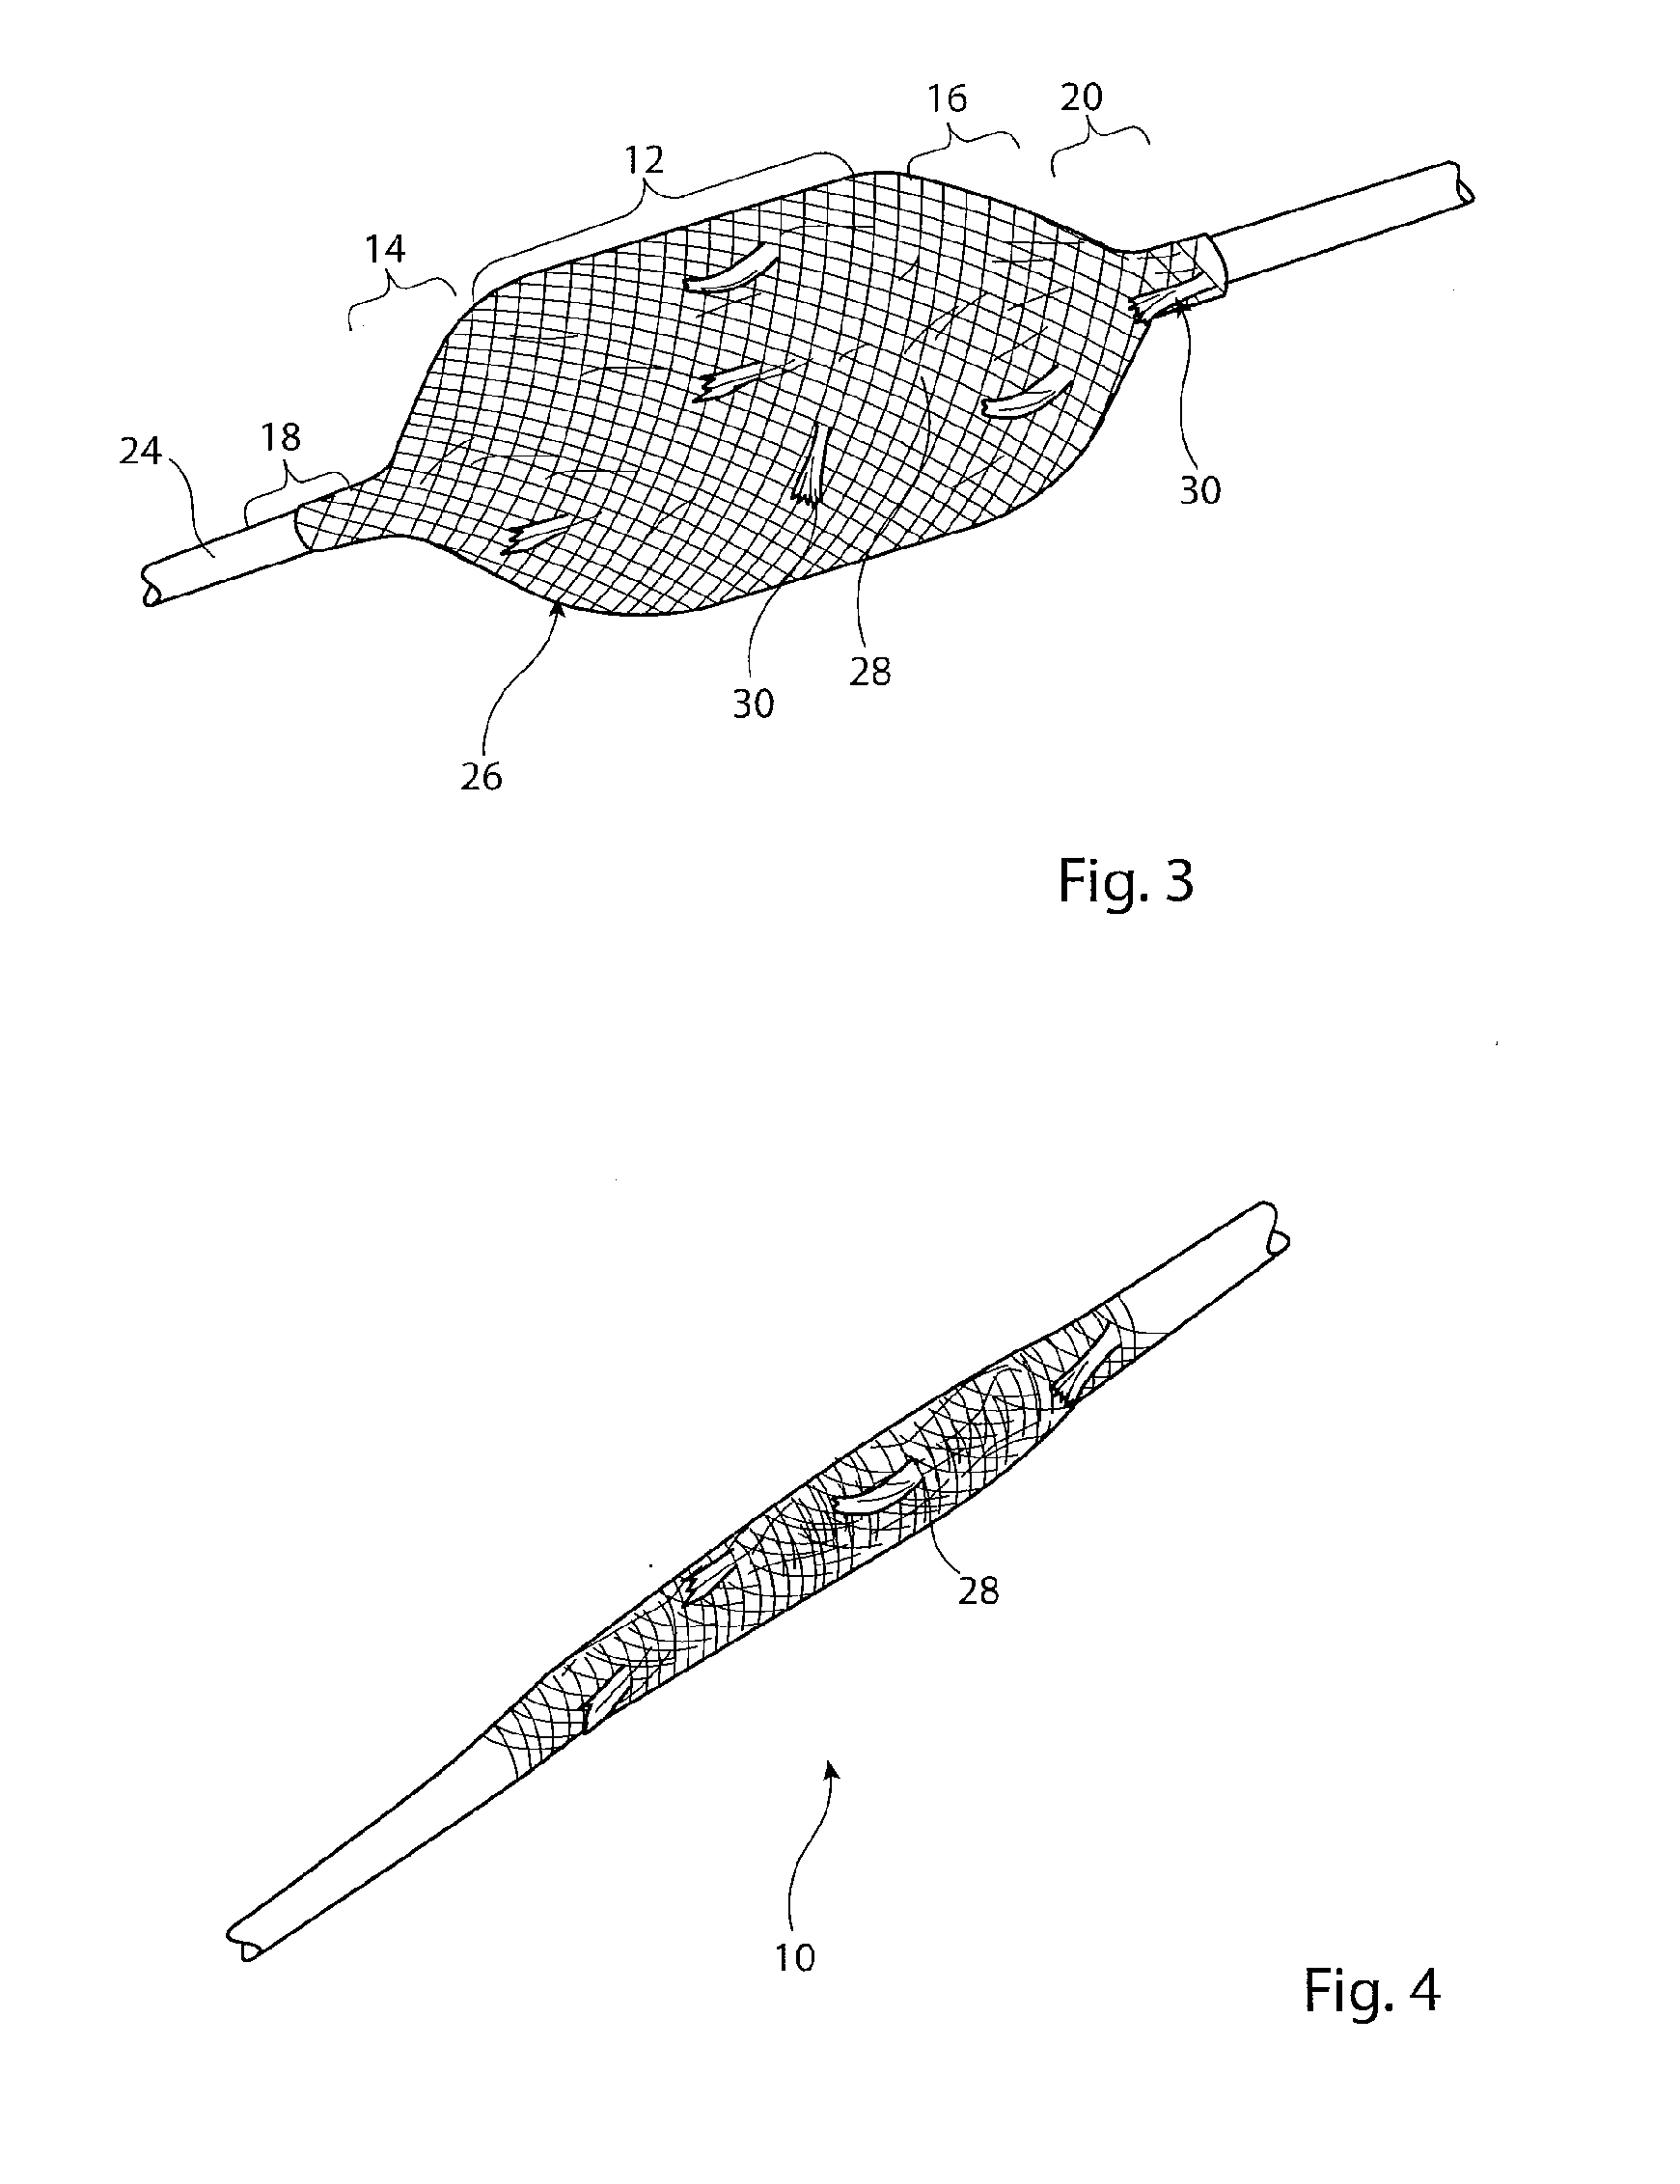 Vascular occlusion device